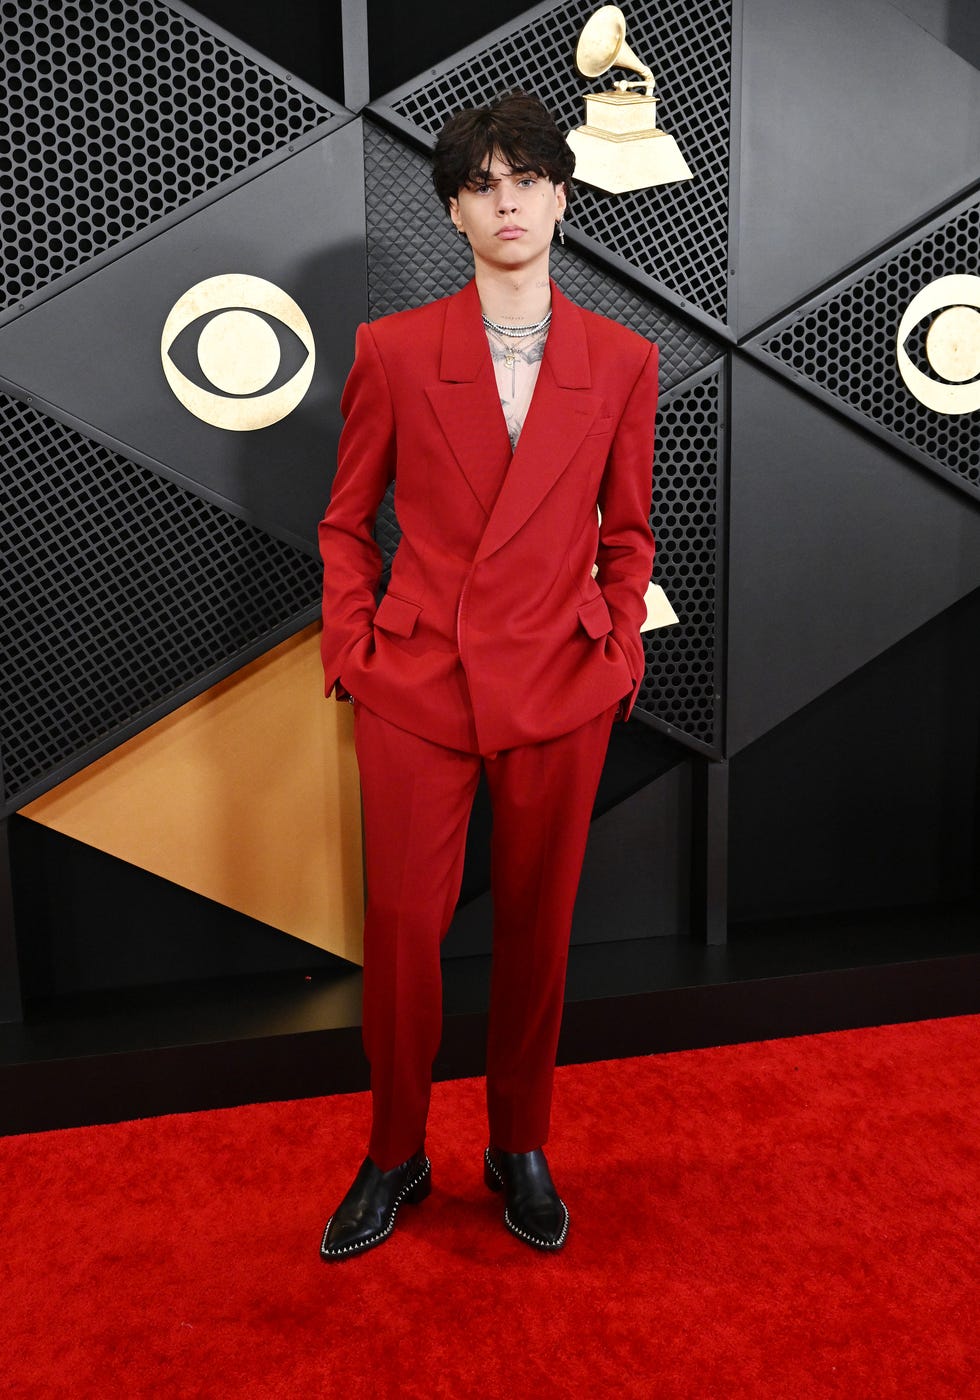 landon barker at the 66th annual grammy awards held at cryptocom arena on february 4, 2024 in los angeles, california photo by gilbert floresbillboard via getty images